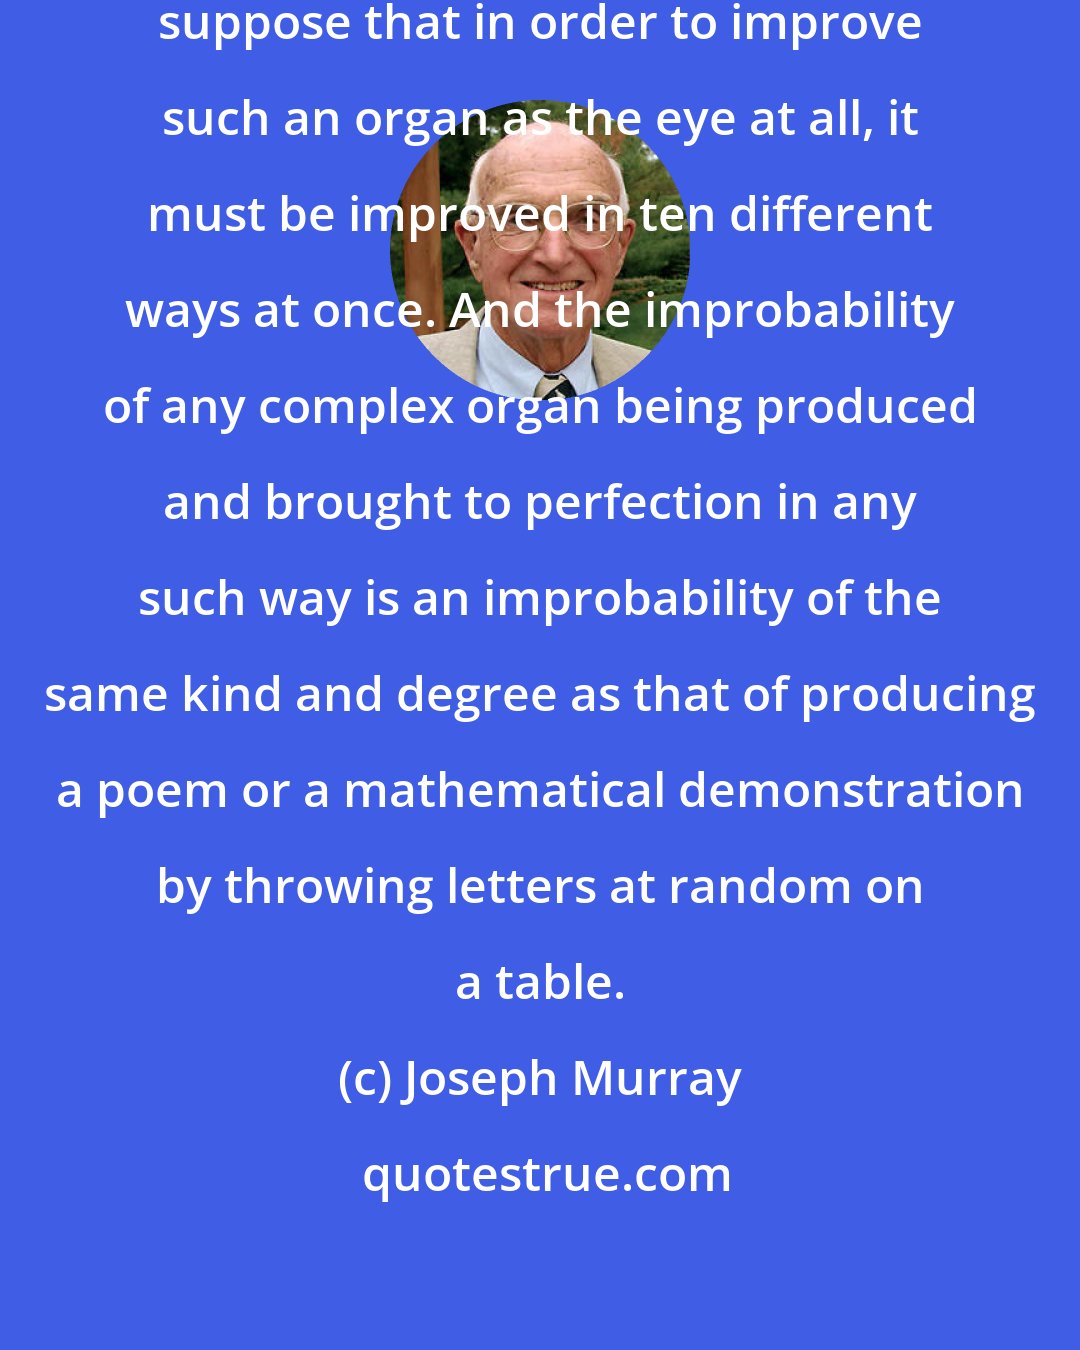 Joseph Murray: It is probably no exaggeration to suppose that in order to improve such an organ as the eye at all, it must be improved in ten different ways at once. And the improbability of any complex organ being produced and brought to perfection in any such way is an improbability of the same kind and degree as that of producing a poem or a mathematical demonstration by throwing letters at random on a table.